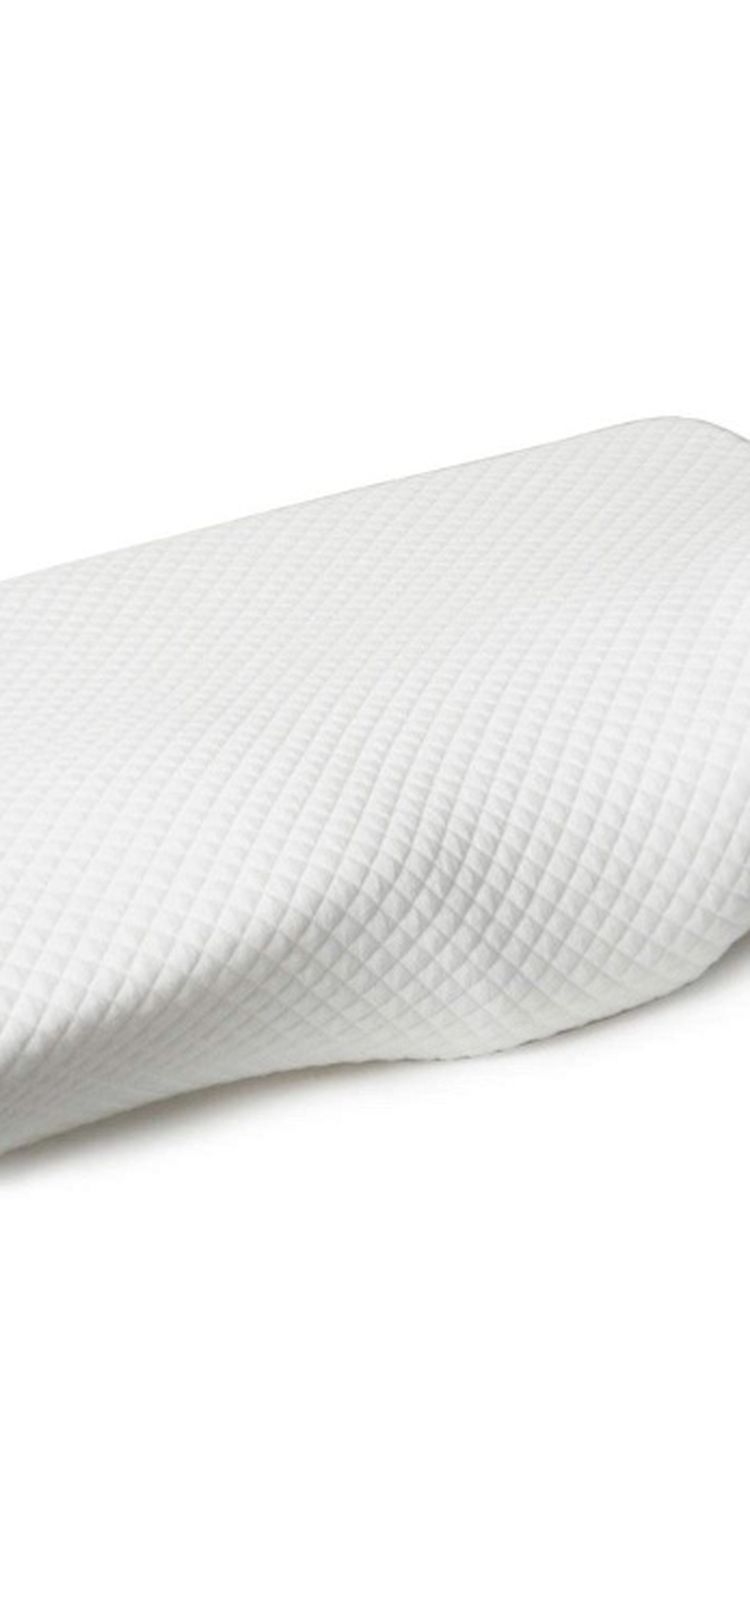 New In Box Neck Pain Relief Pillow